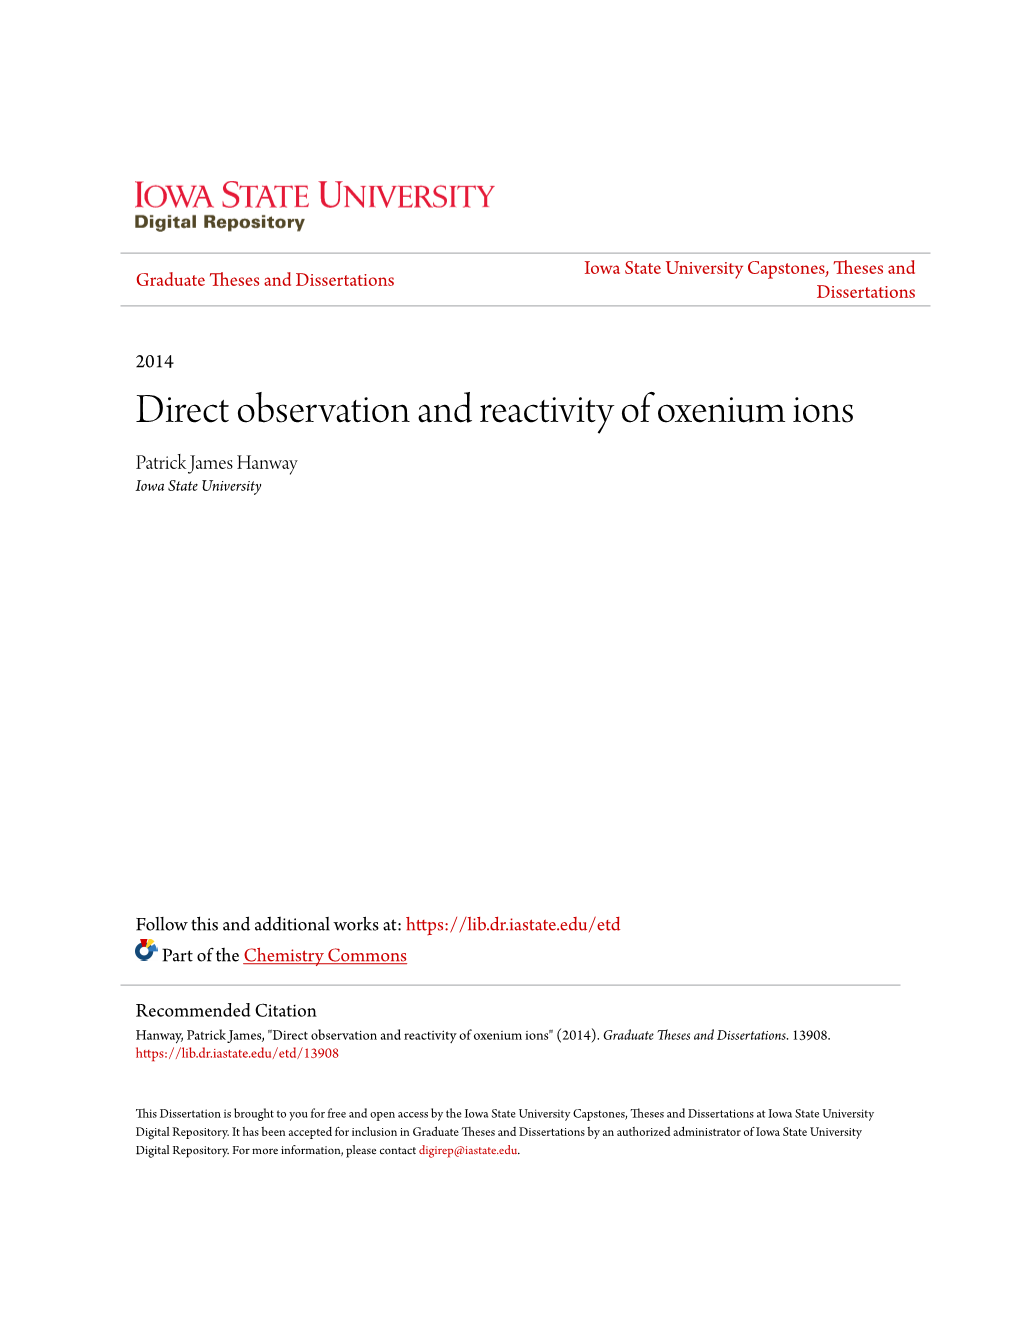 Direct Observation and Reactivity of Oxenium Ions Patrick James Hanway Iowa State University